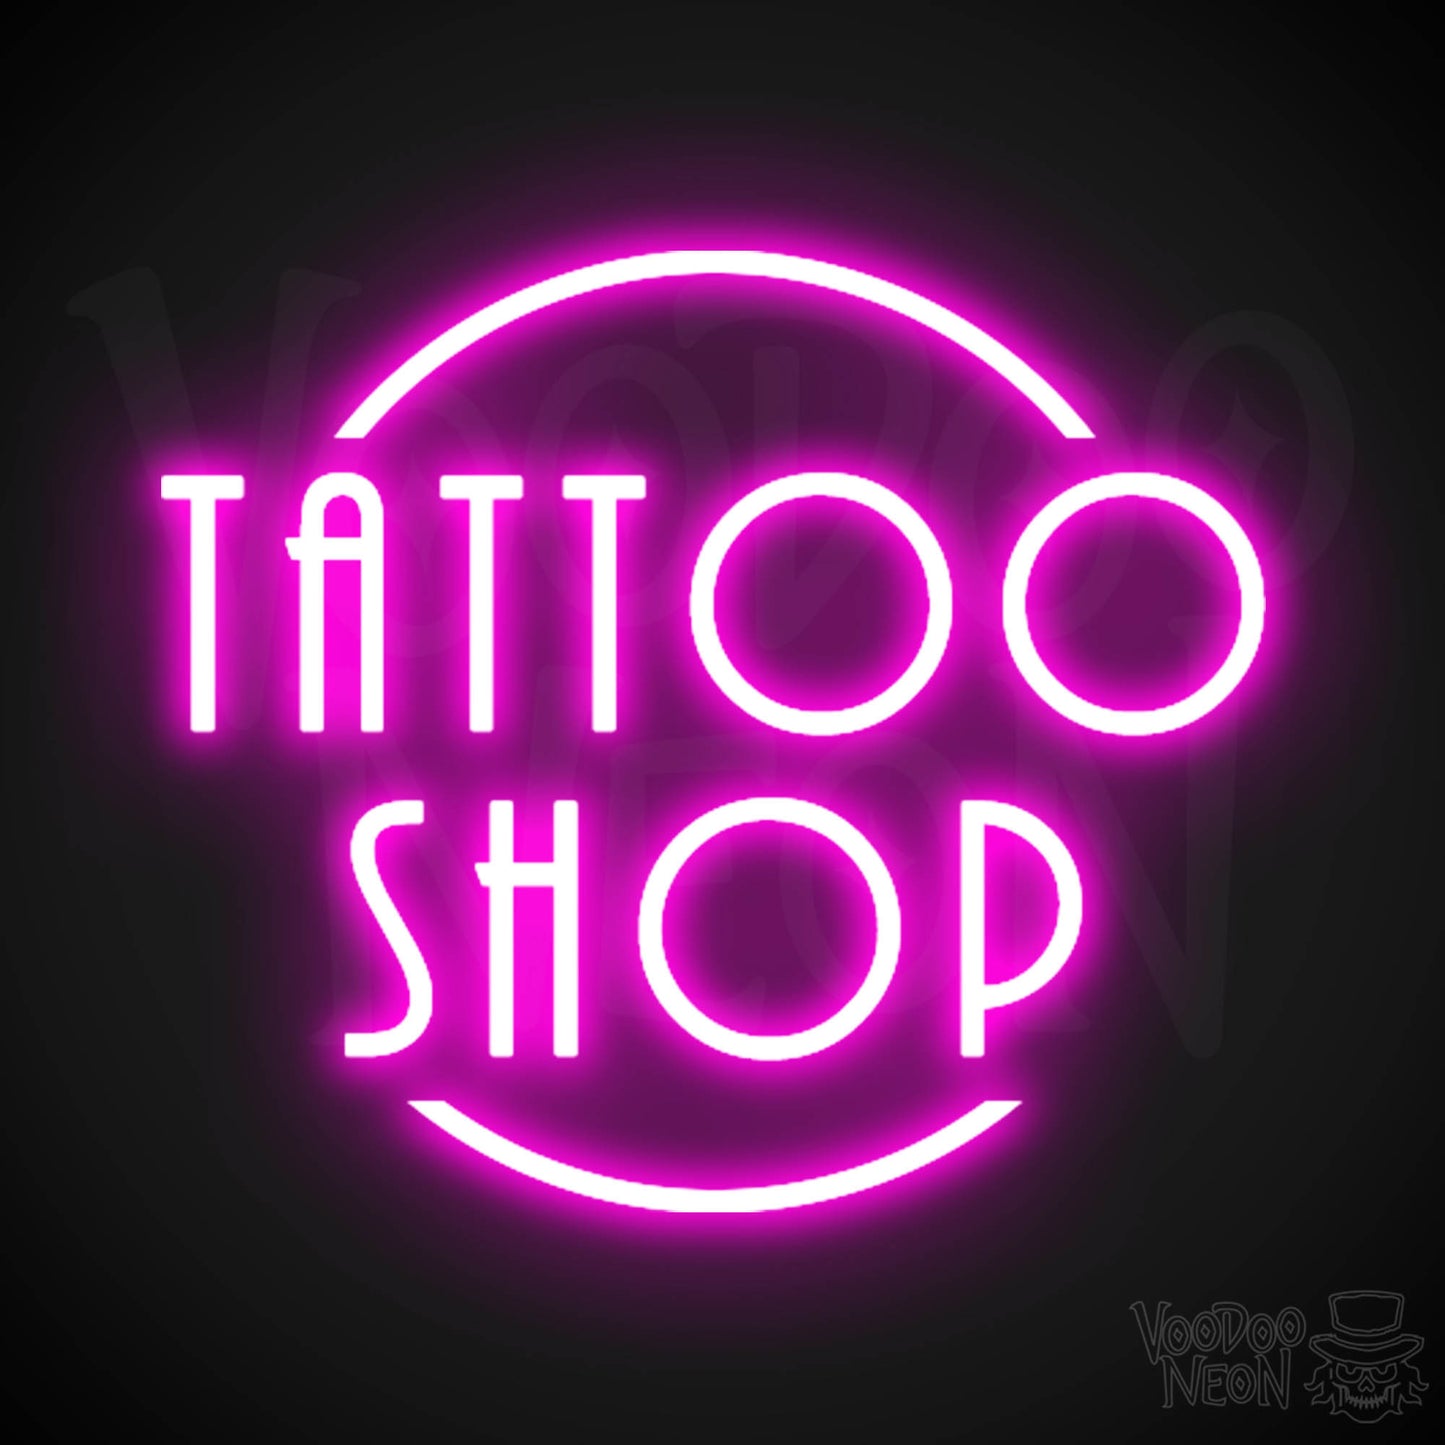 Tattoo Shop Neon Sign - Neon Tattoo Shop Sign - Tattoo Sign - Color Pink